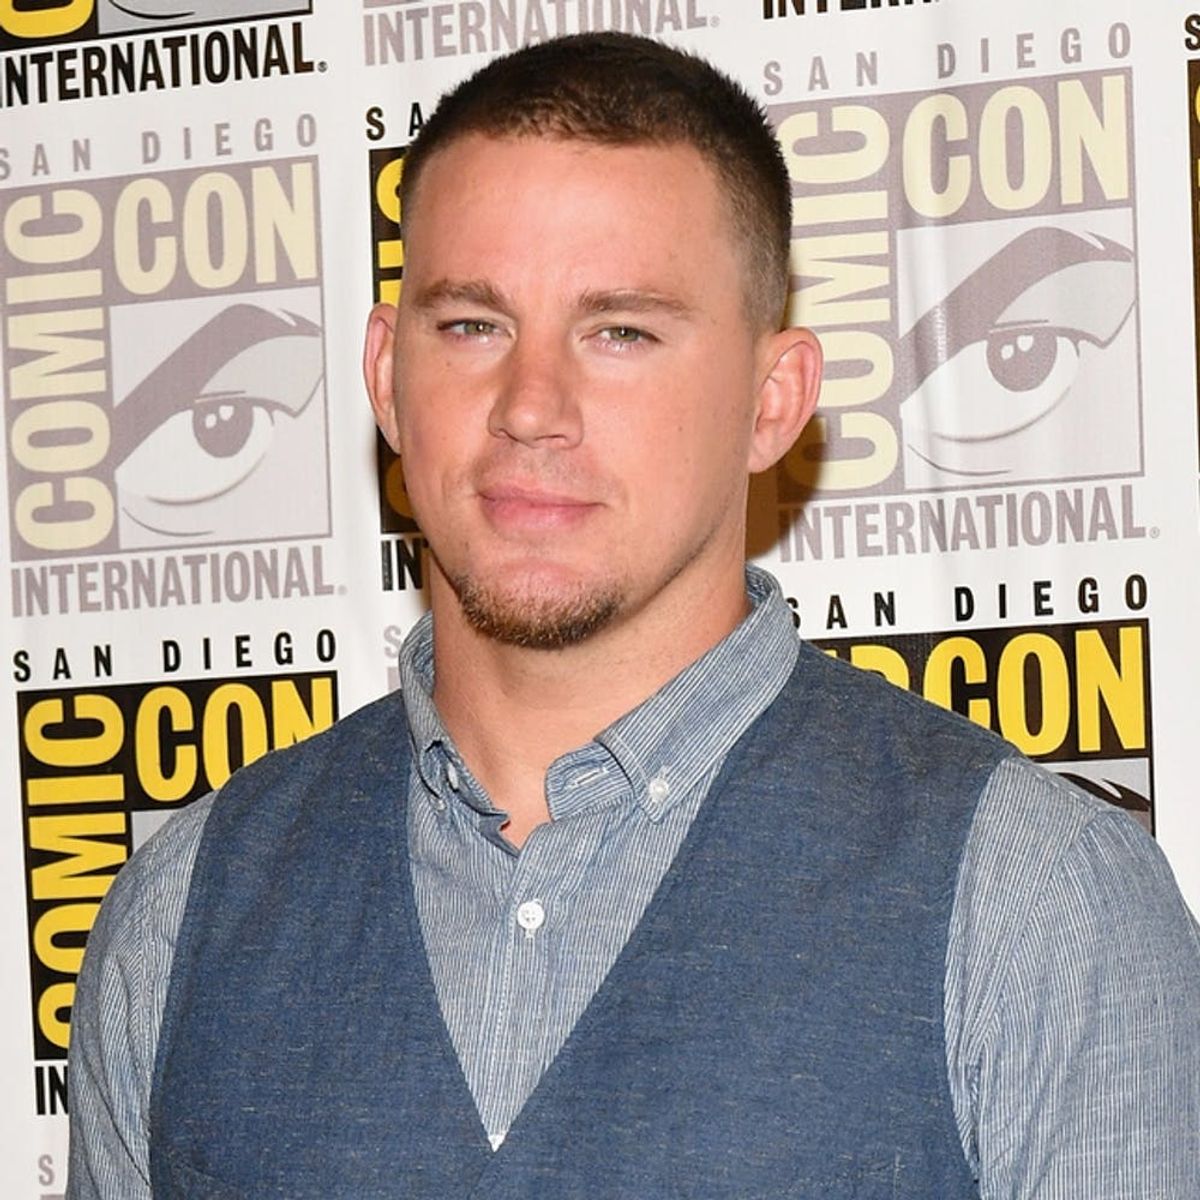 Channing Tatum Wearing a Tie Painted by His Daughter Will Make You Swoon